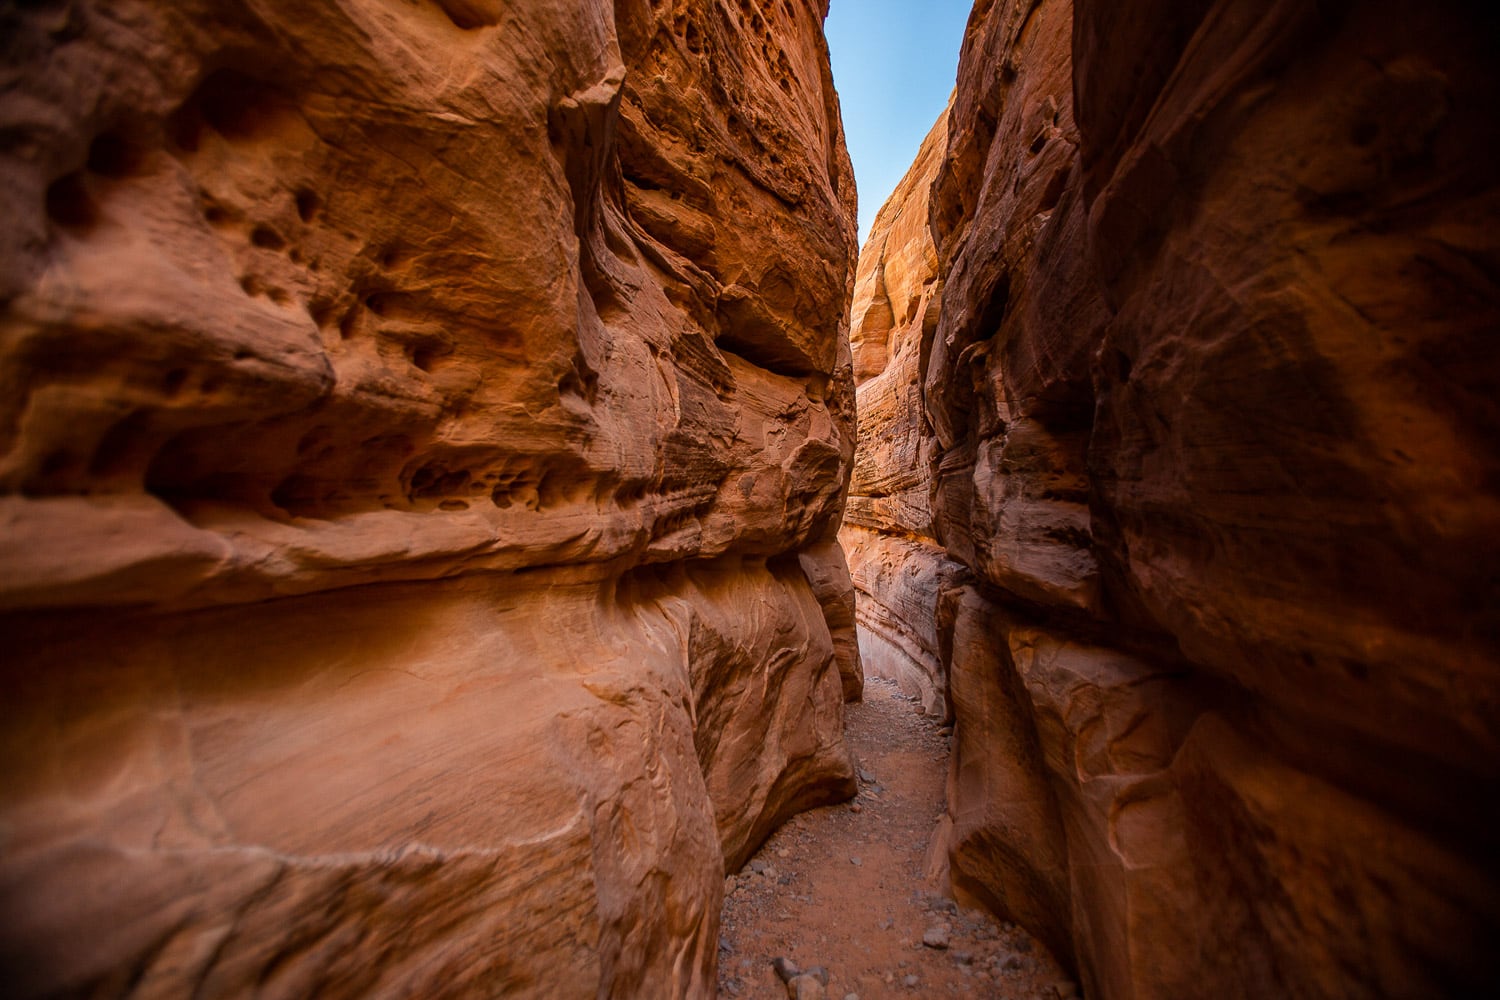 The slot canyon's red walls are so close together you can touch both sides.